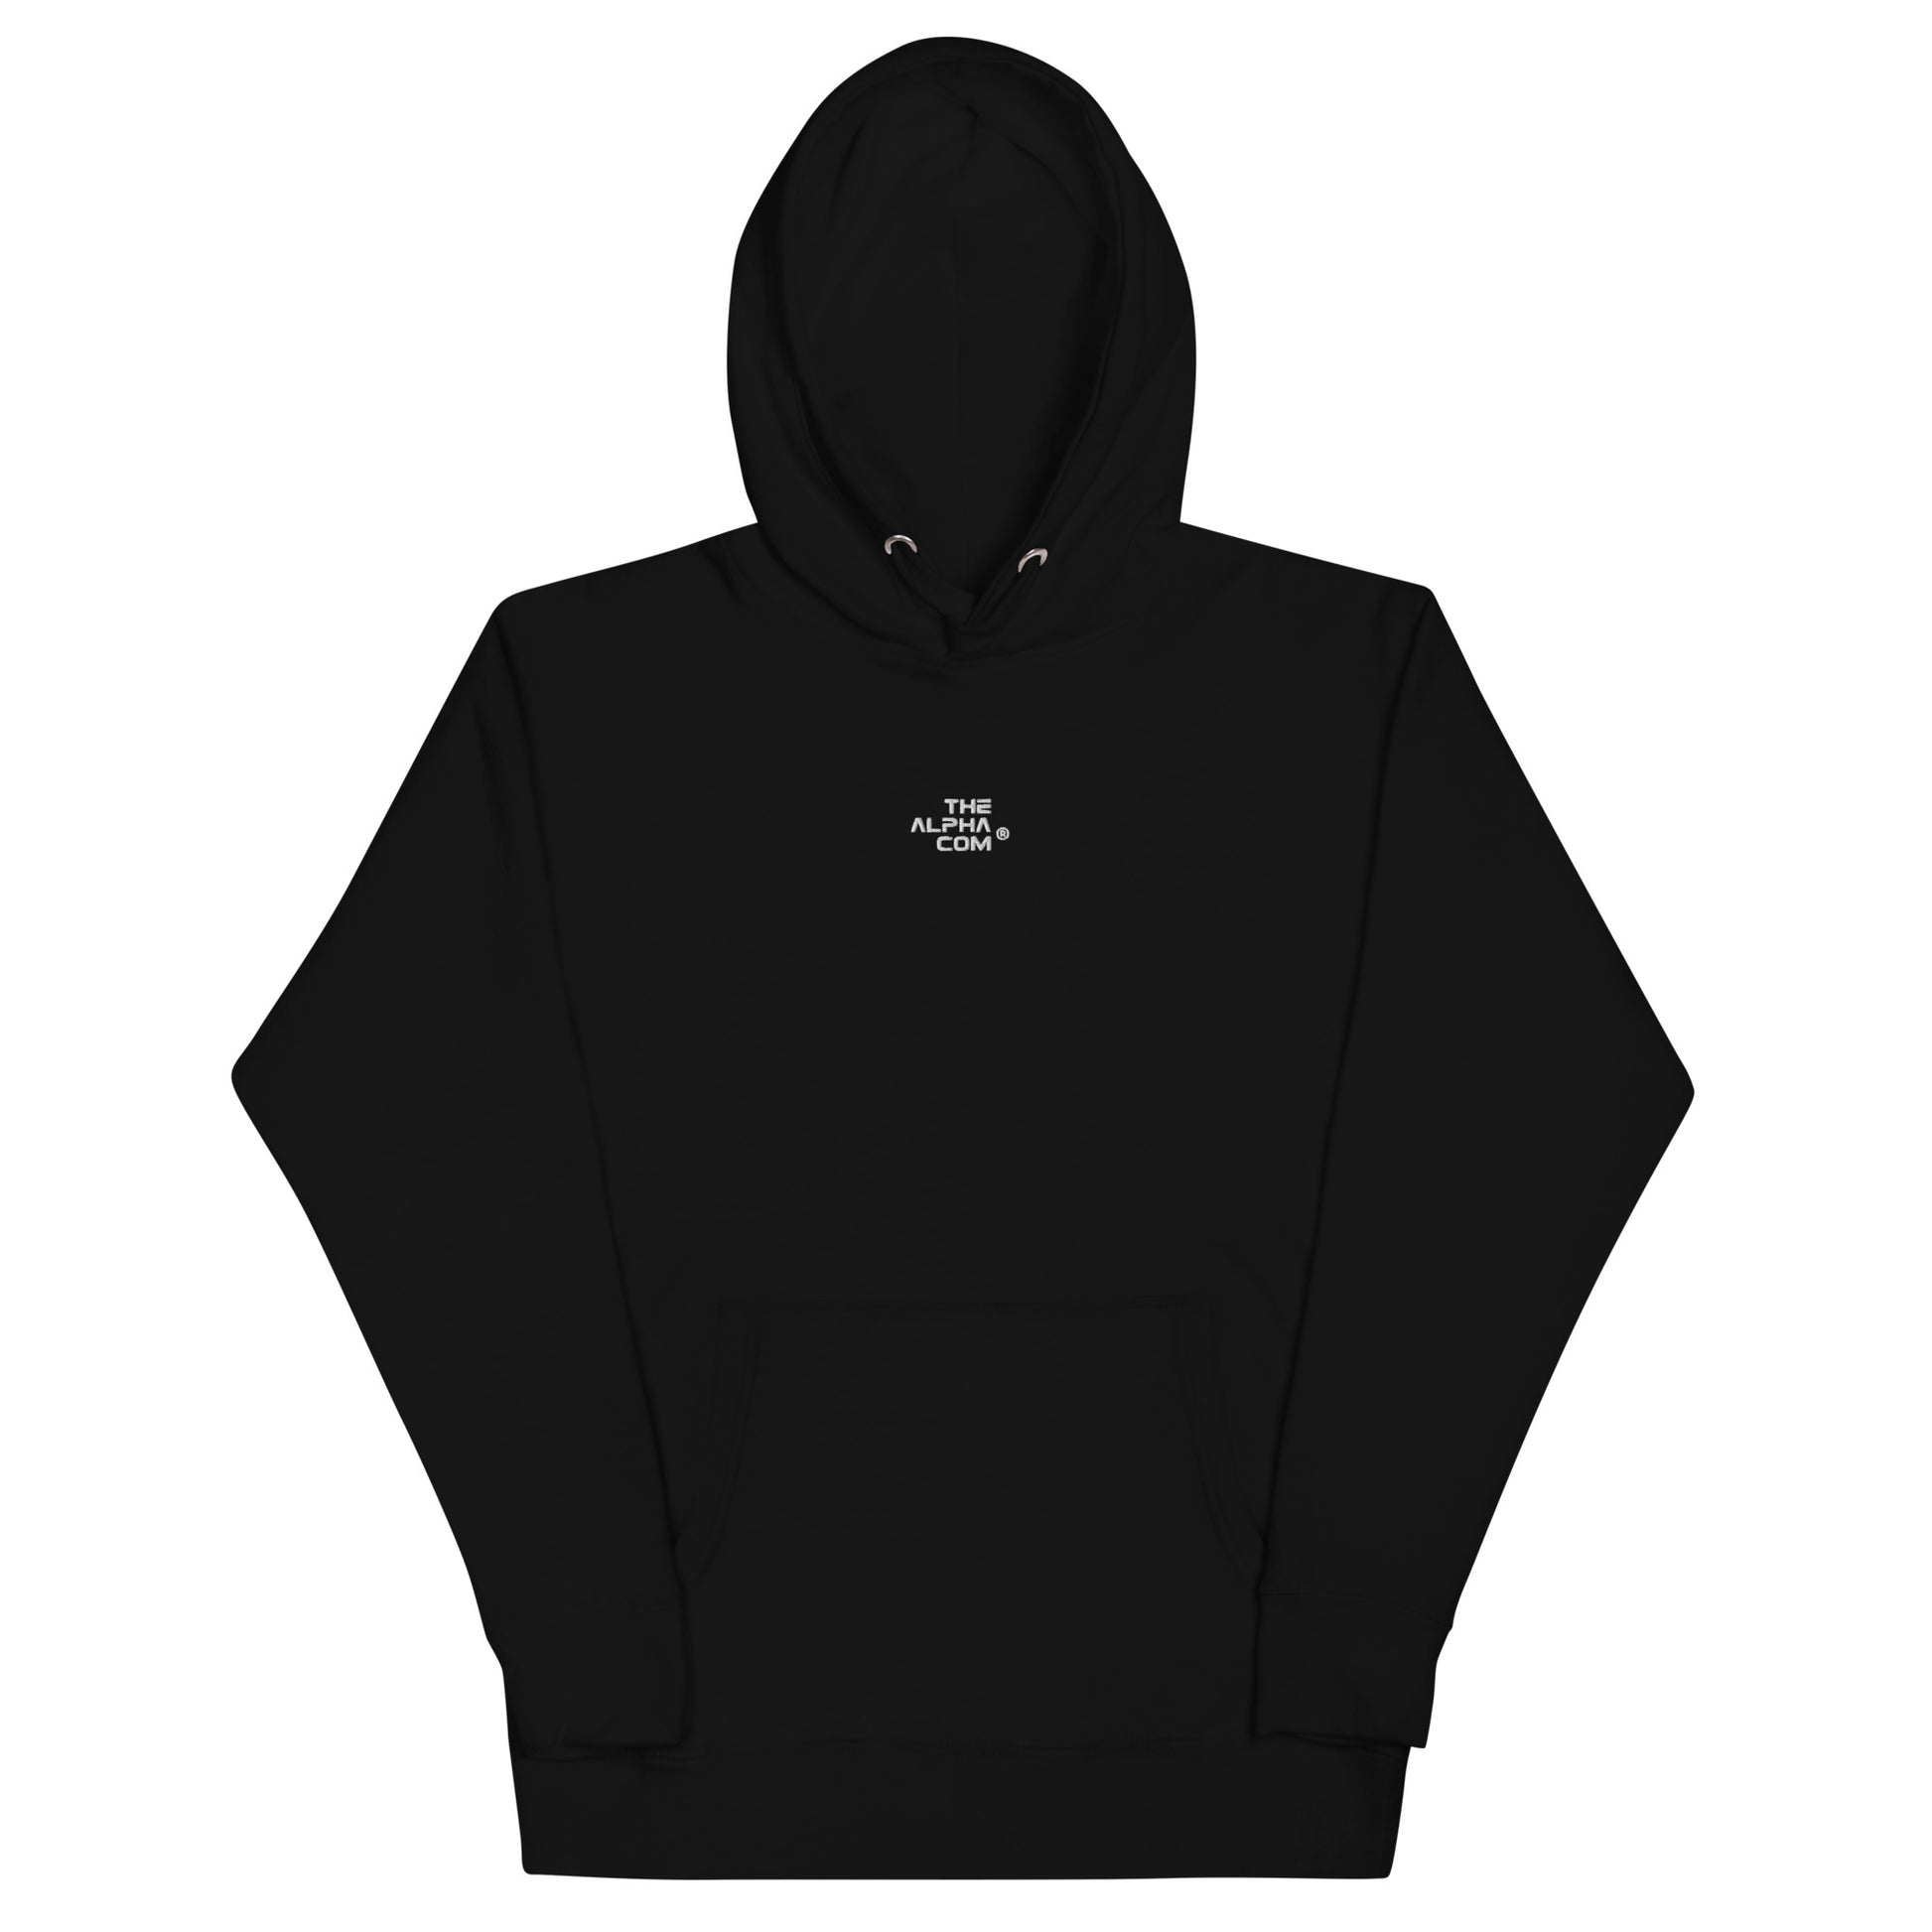 Hoodie ® ALPHA THE Unisex embroidered GRW COM